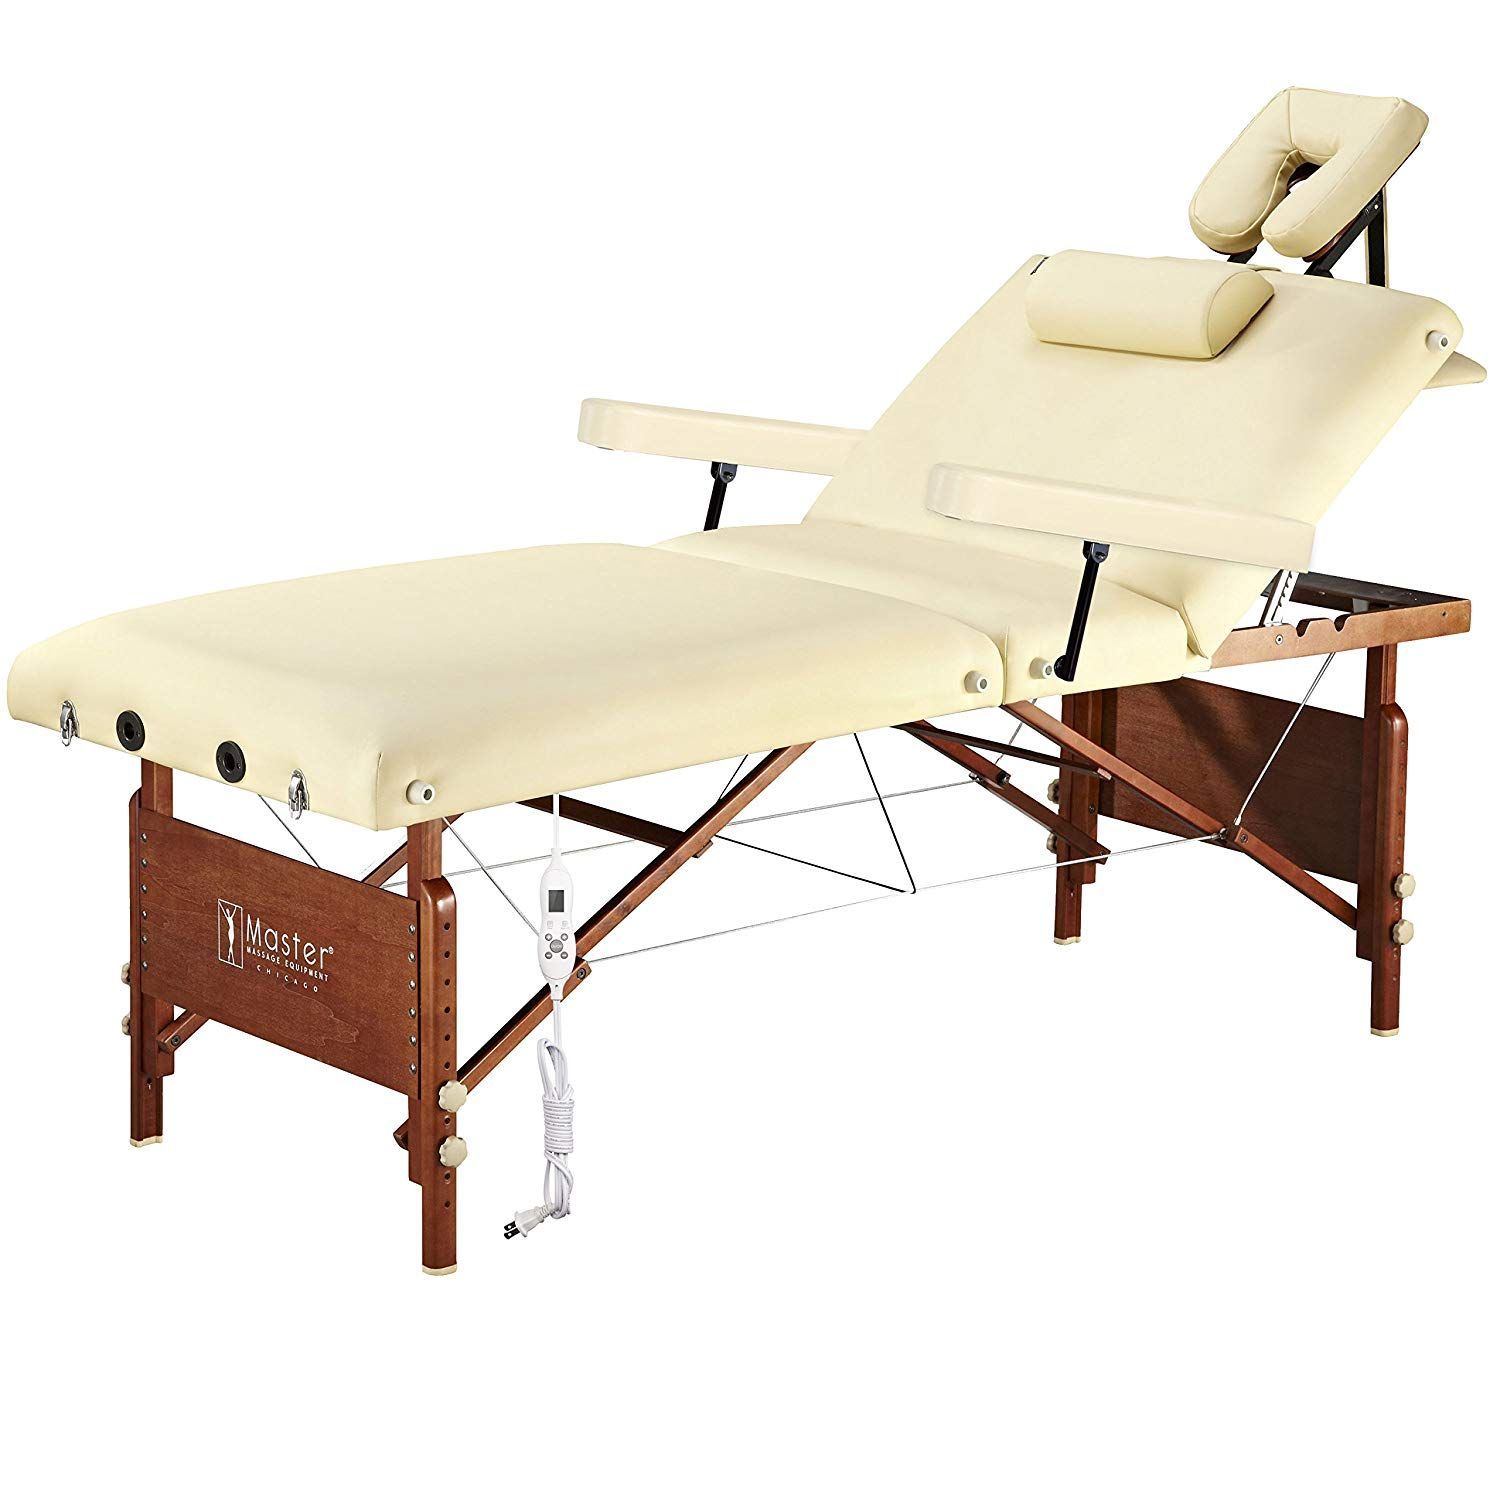 Massage table sexual position pic